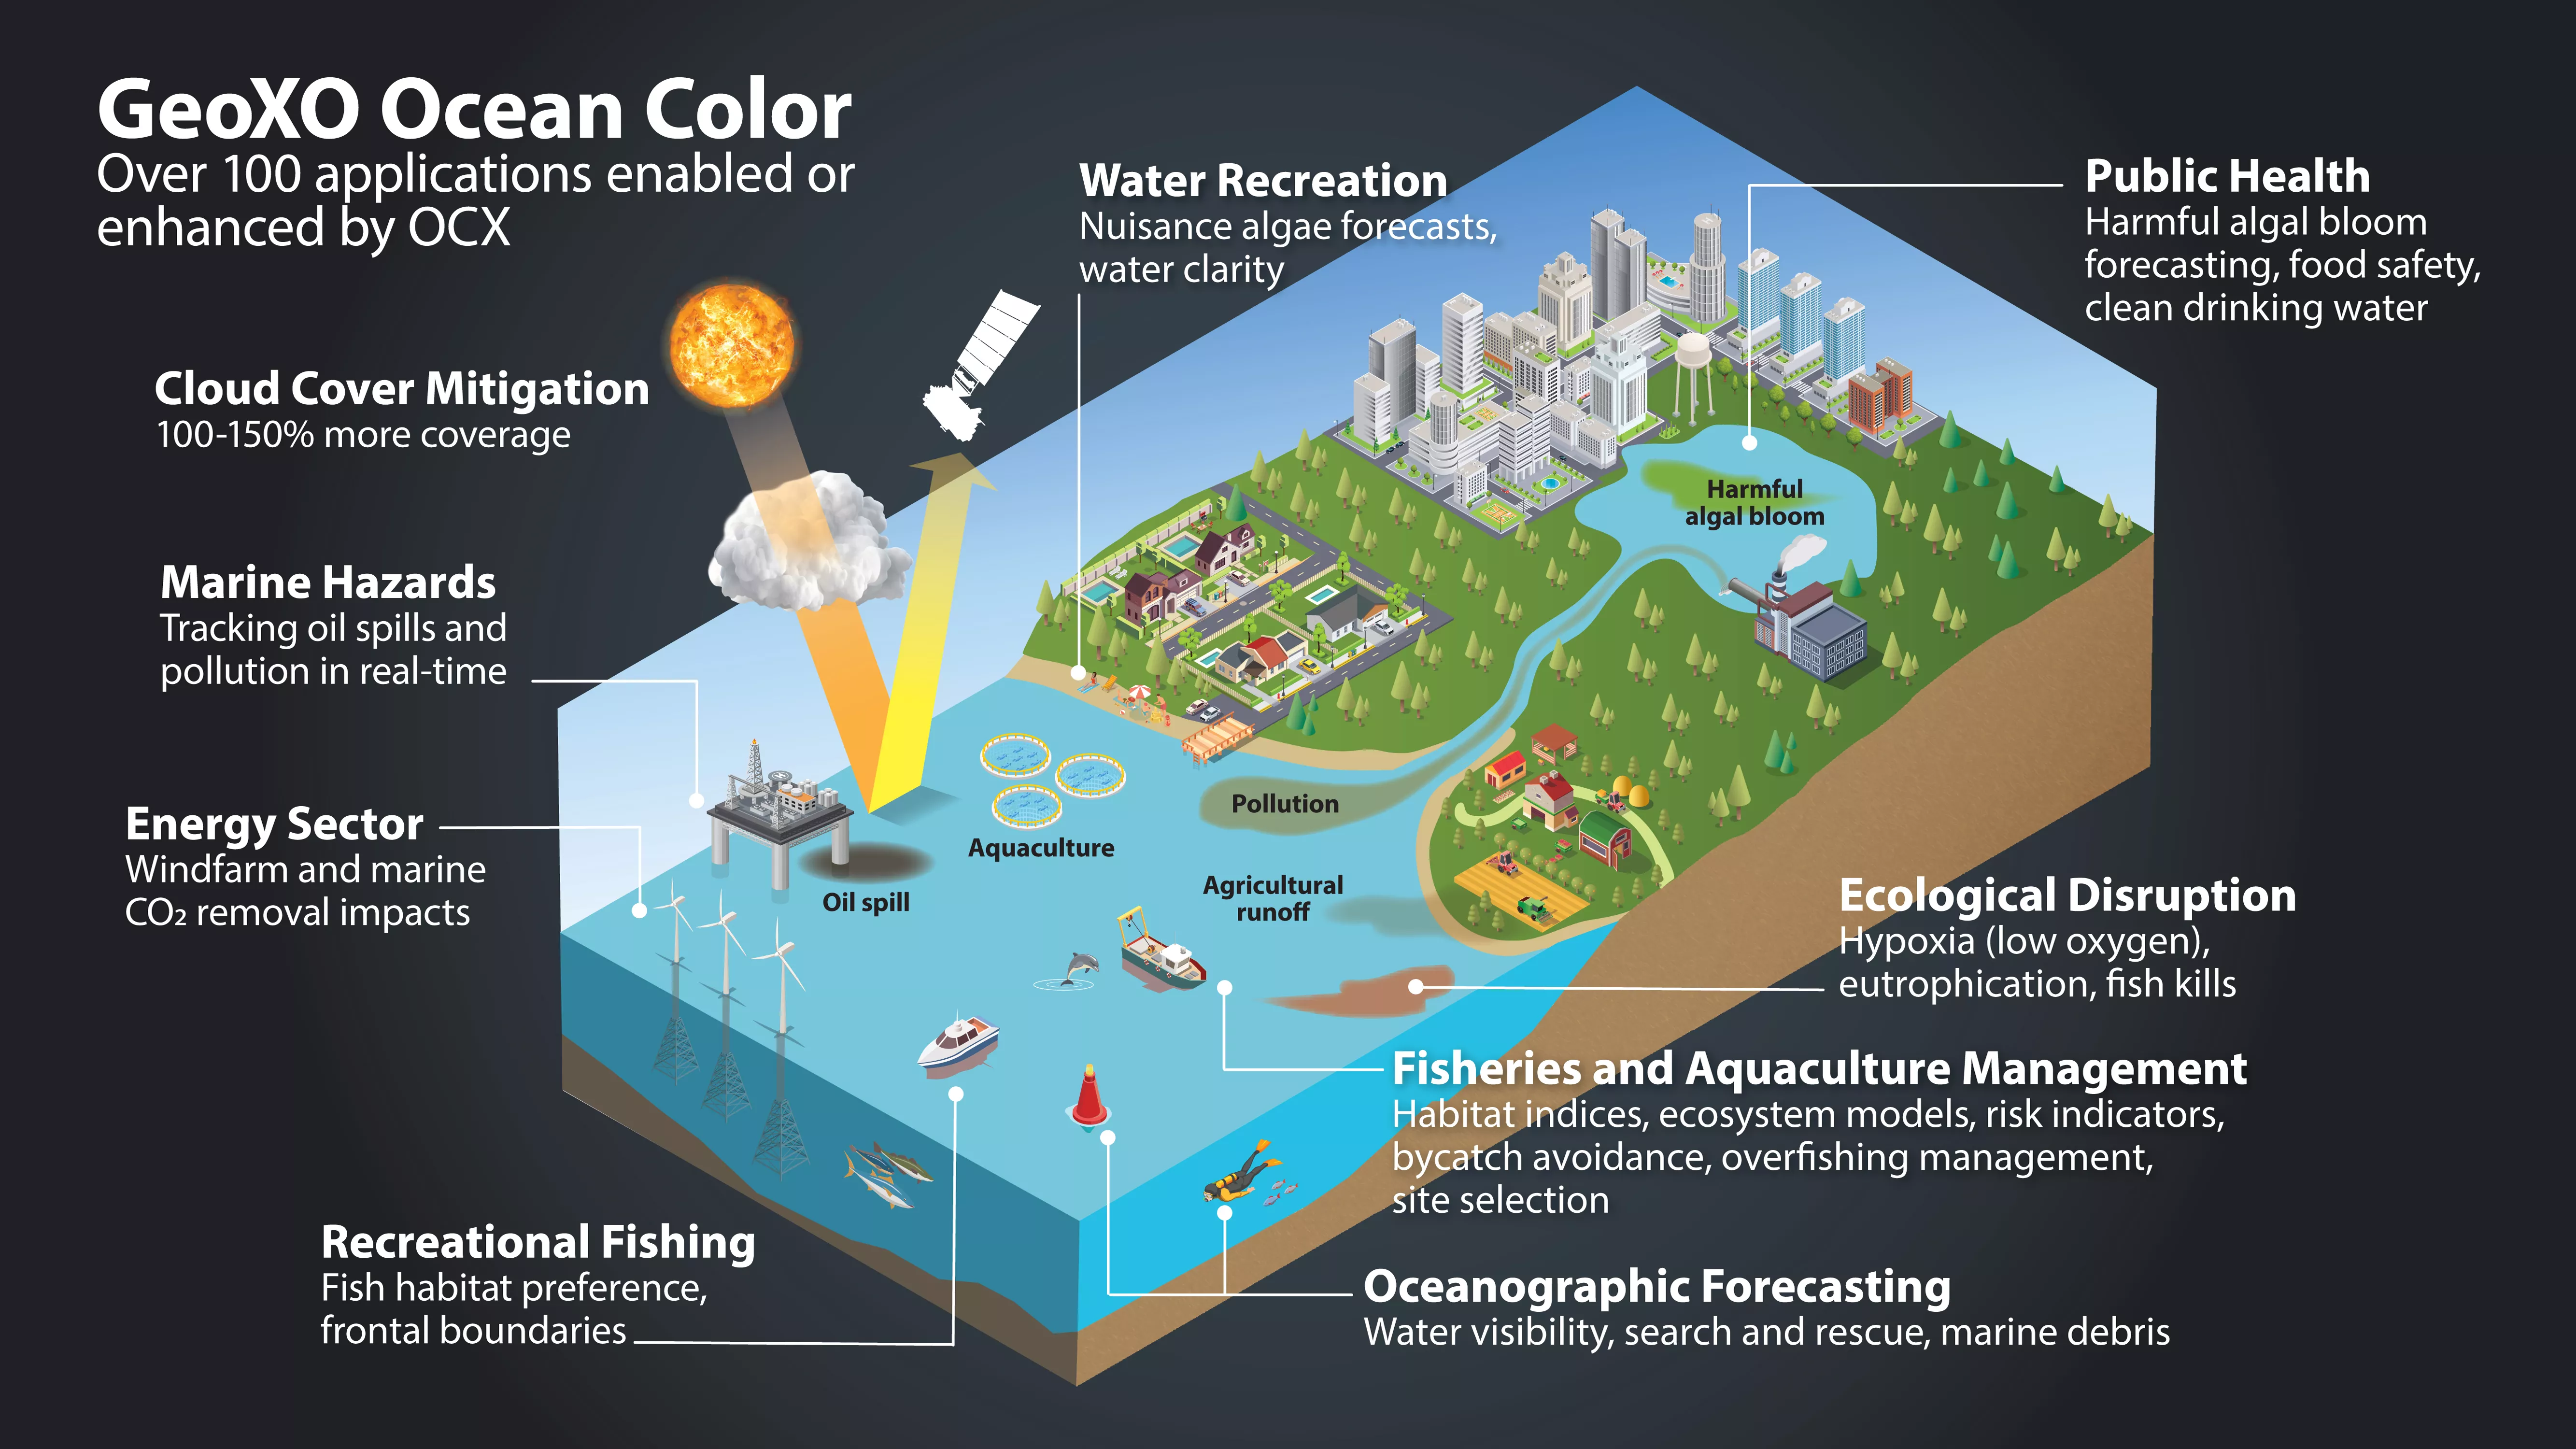 This is a GeoXO Program OCX Infographic. It describes the applications enhanced by OCS instrument which are Cloud Cover Migration, Marine Hazards, Energy Sector, Recreational Fishing, Oceanographic Forecasting, Fisheries and Aquaculture Management, Ecological Disruption, Public Health, and Water Recreation.